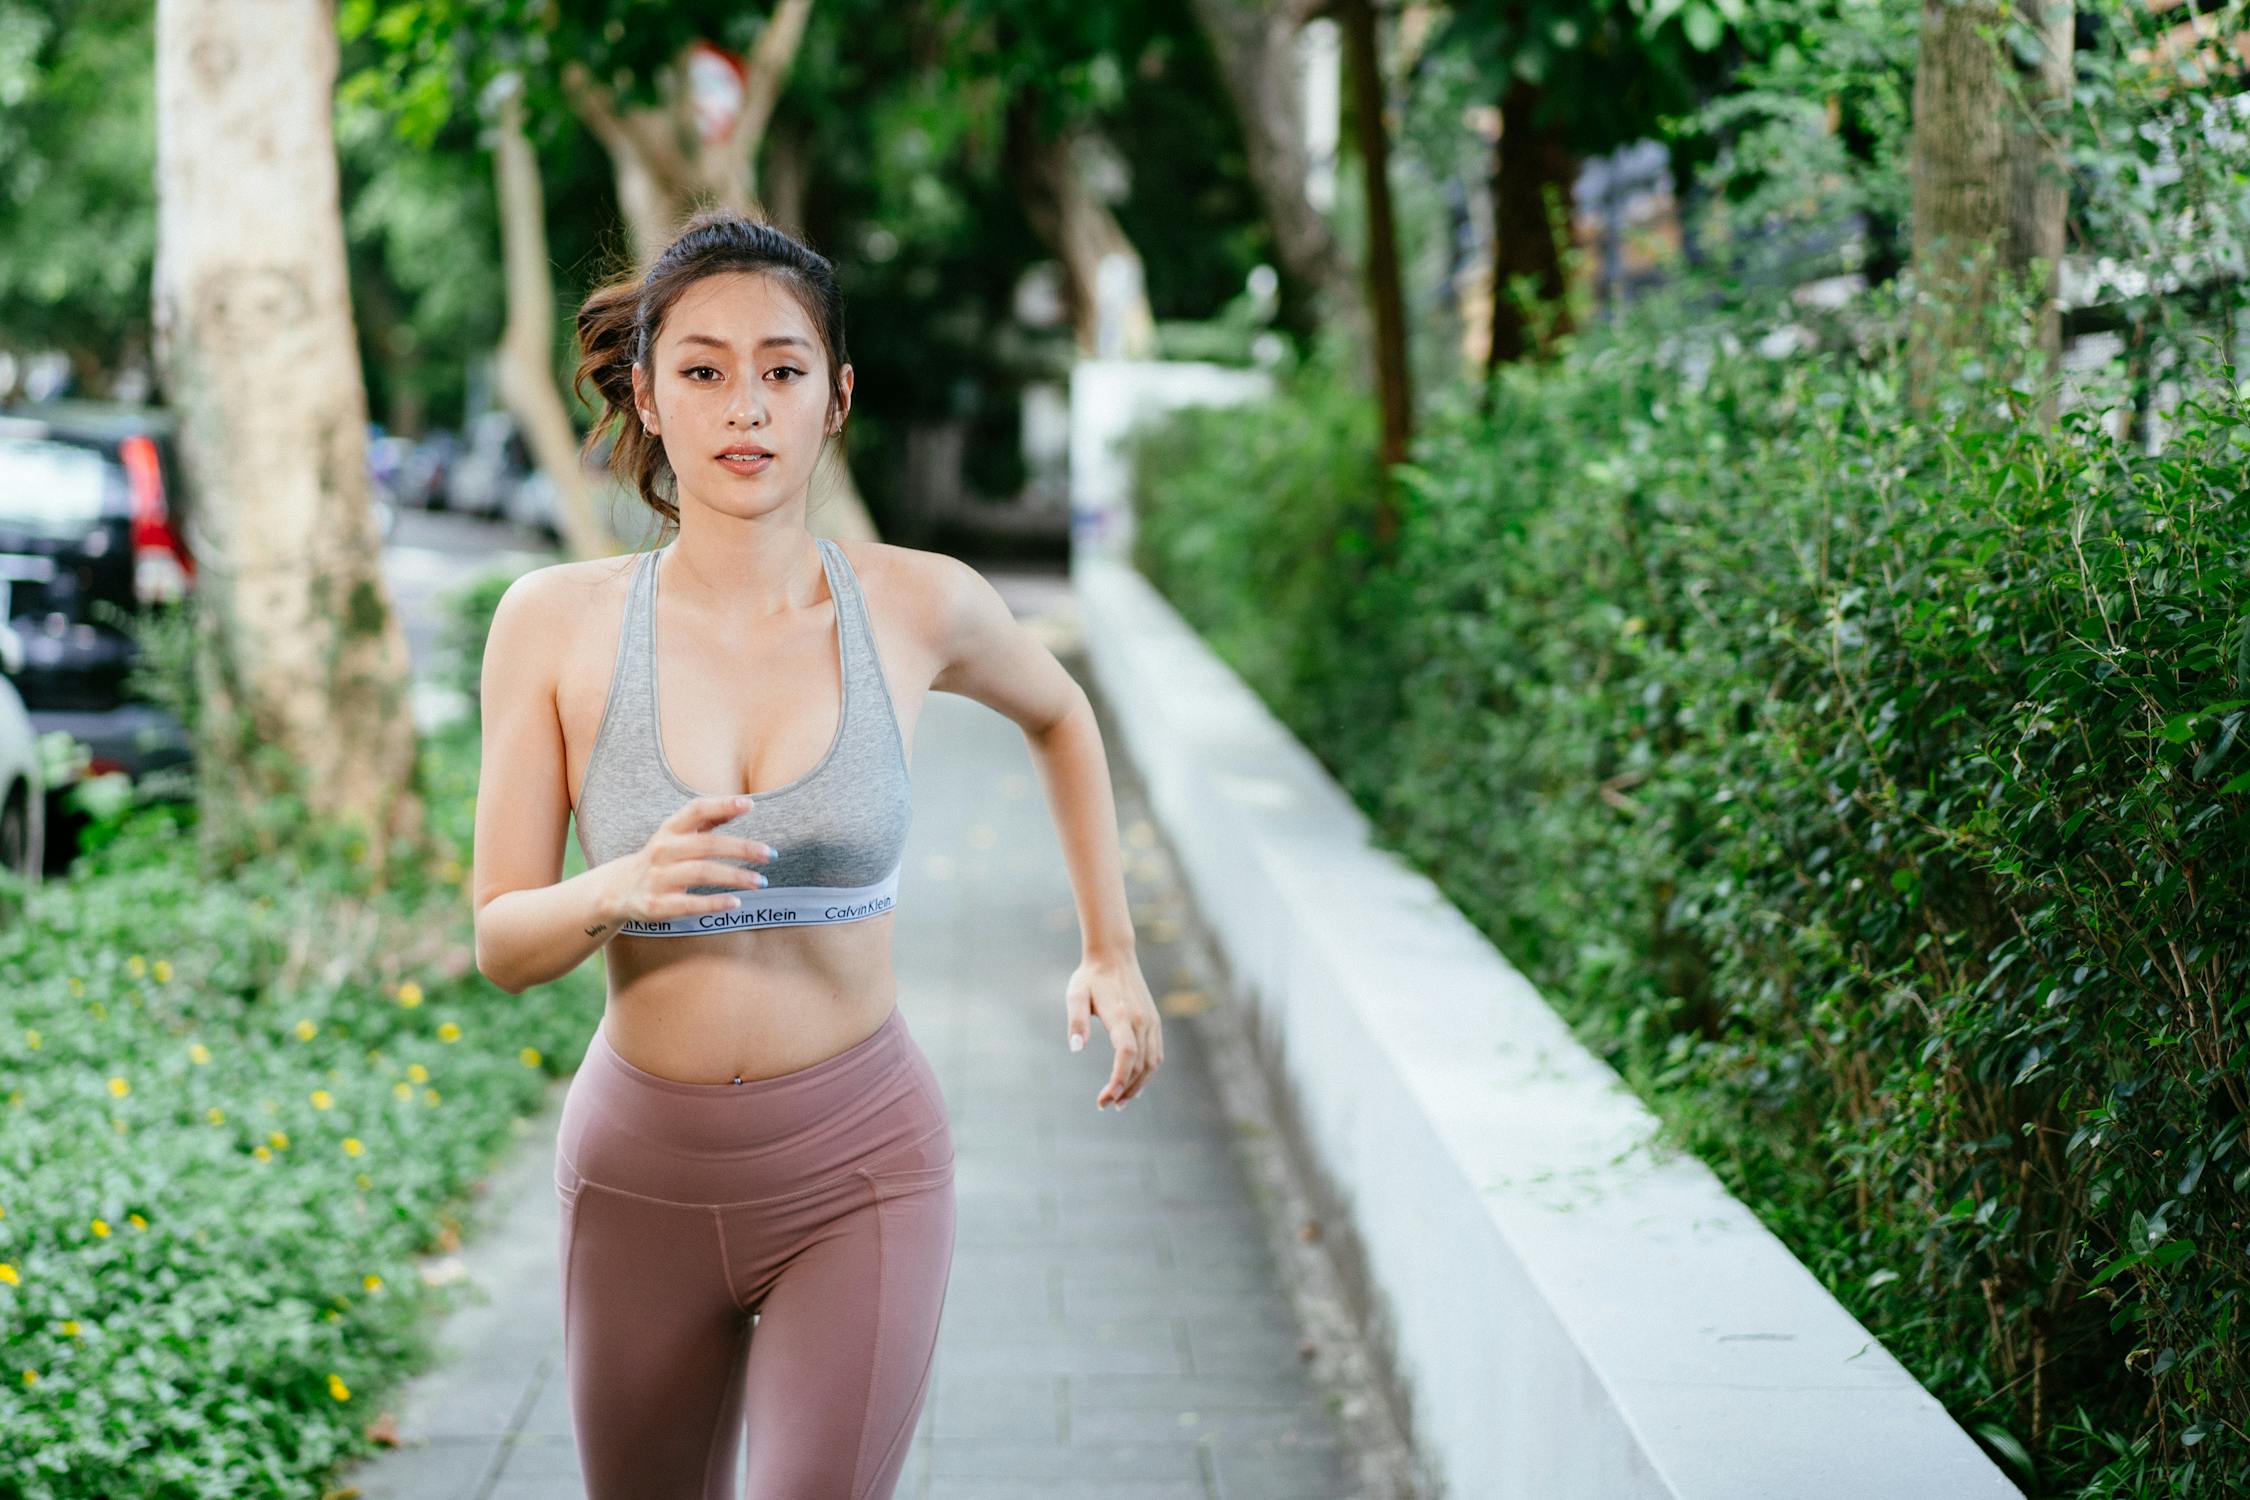 Jogging Photo by Paul Sky from Pexels